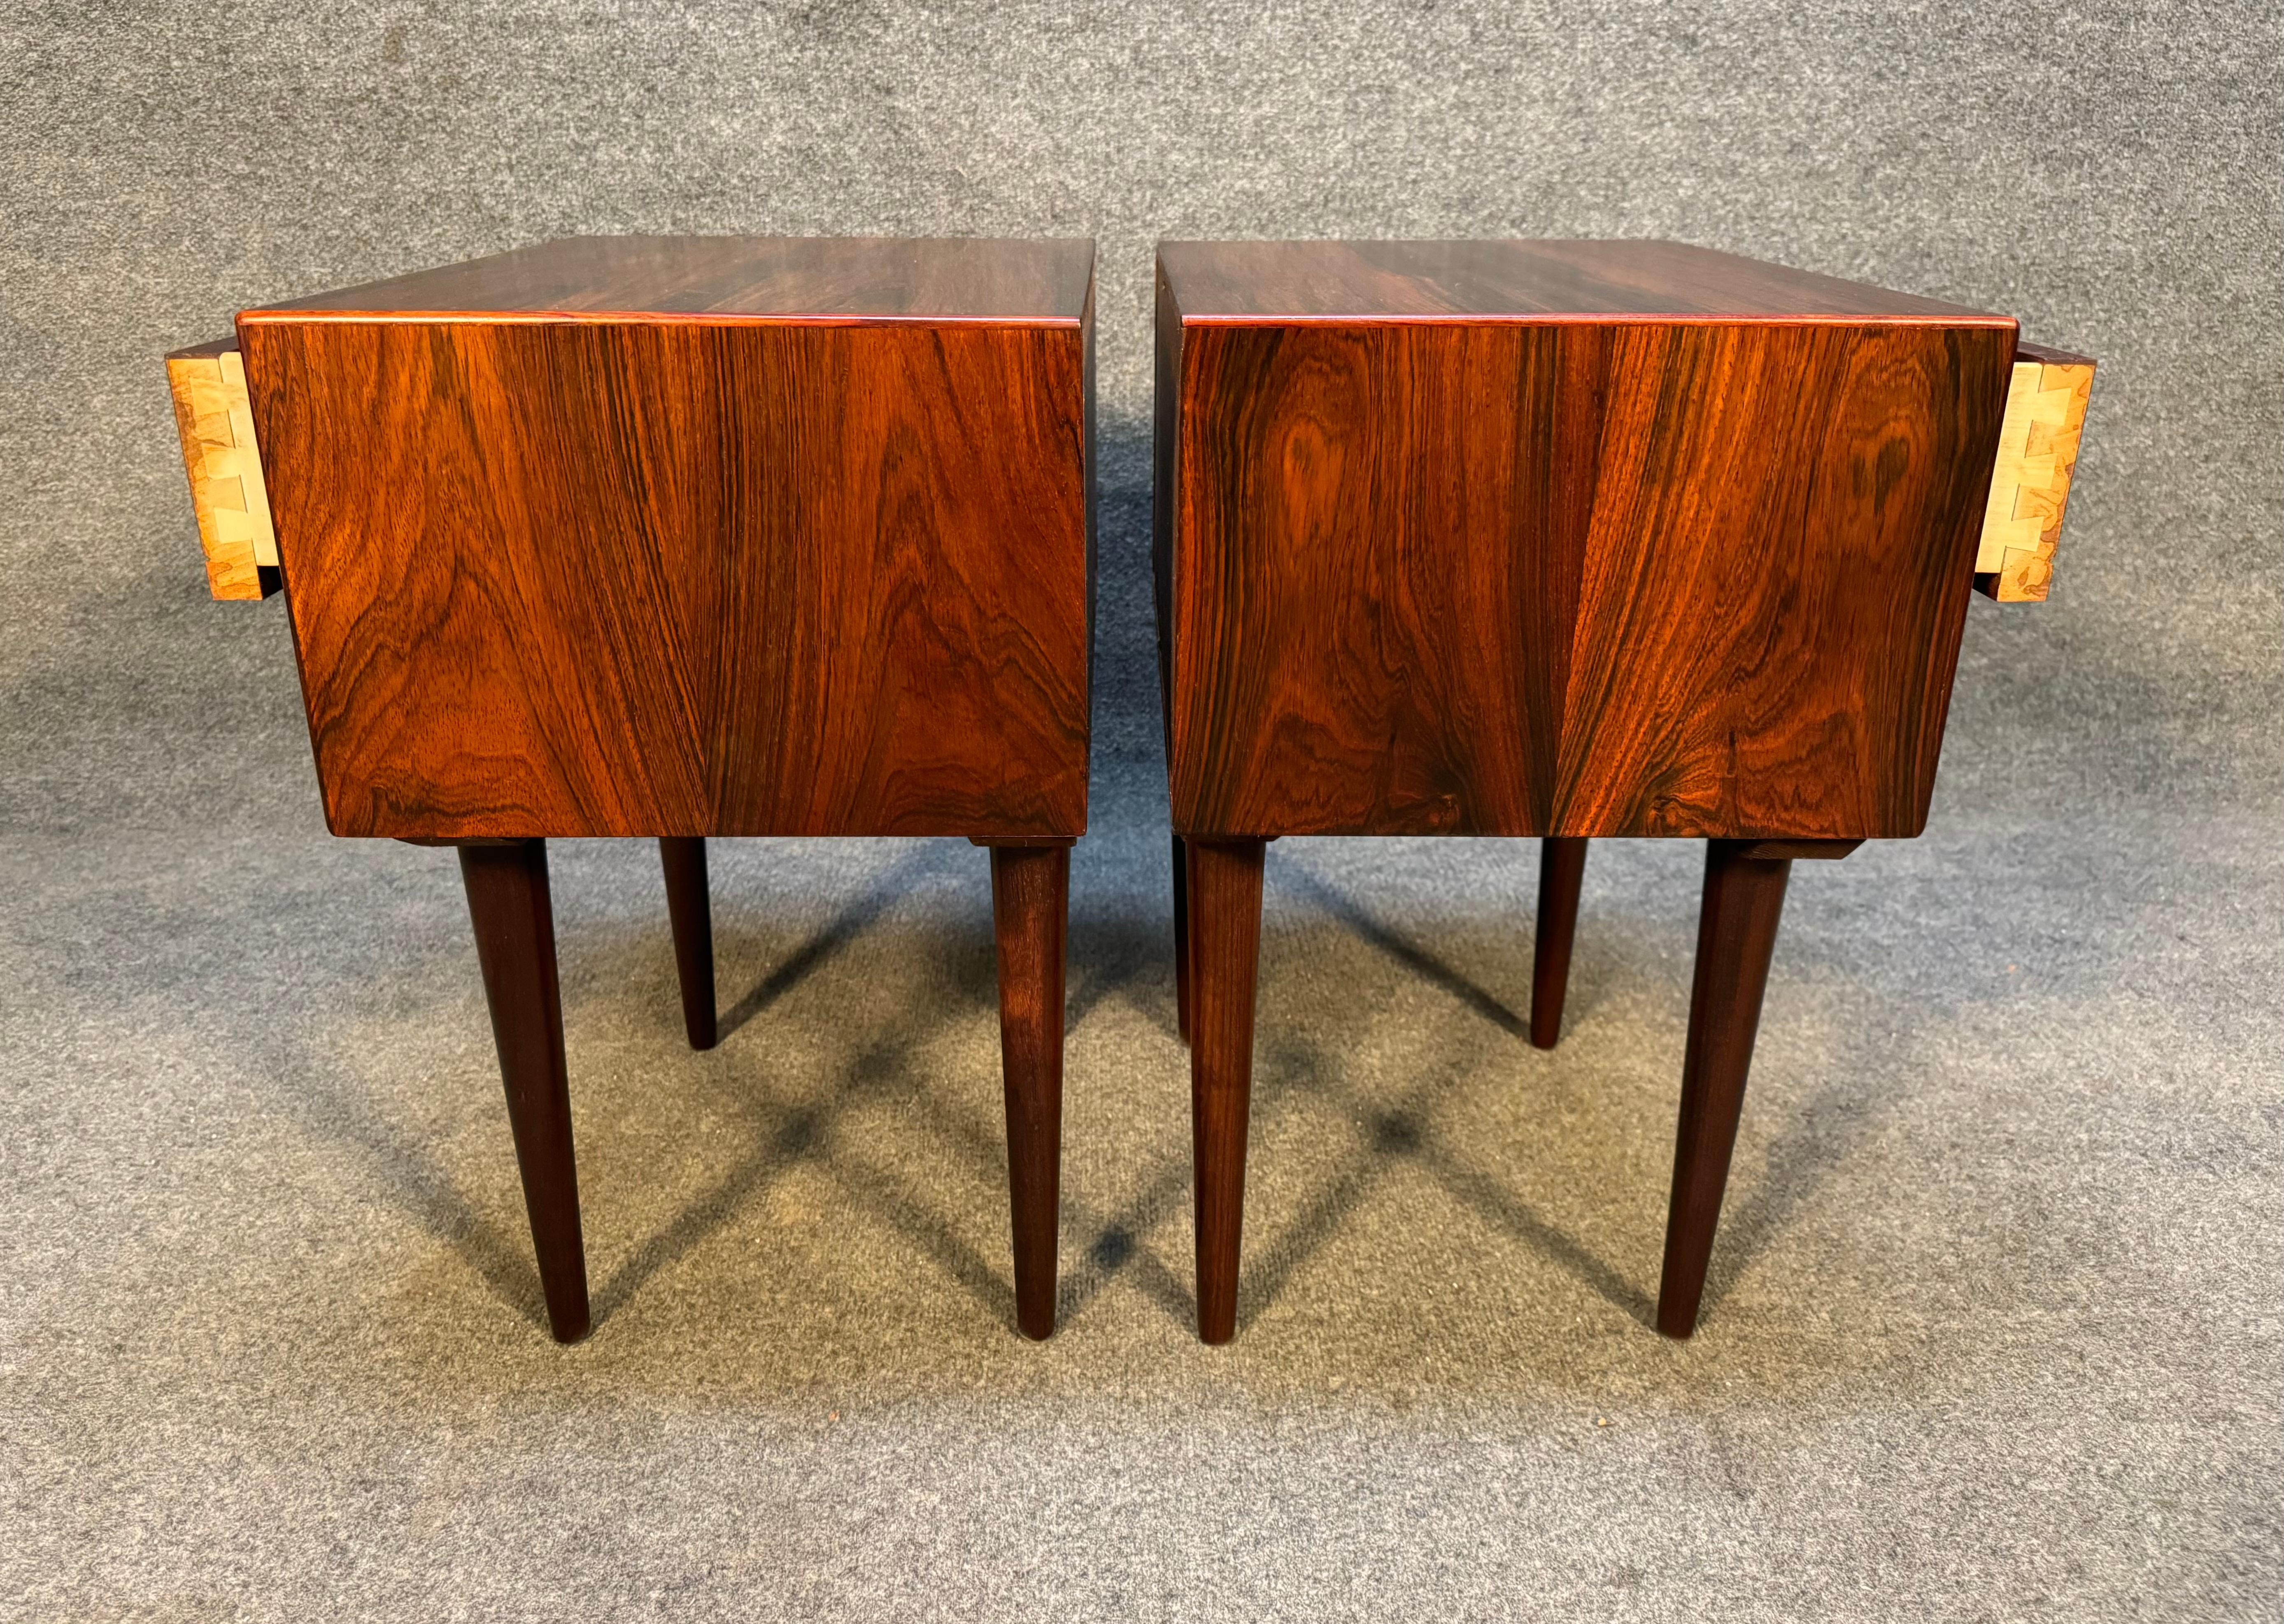 Pair of Vintage Danish Mid Century Modern Rosewood Nightstands In Good Condition For Sale In San Marcos, CA